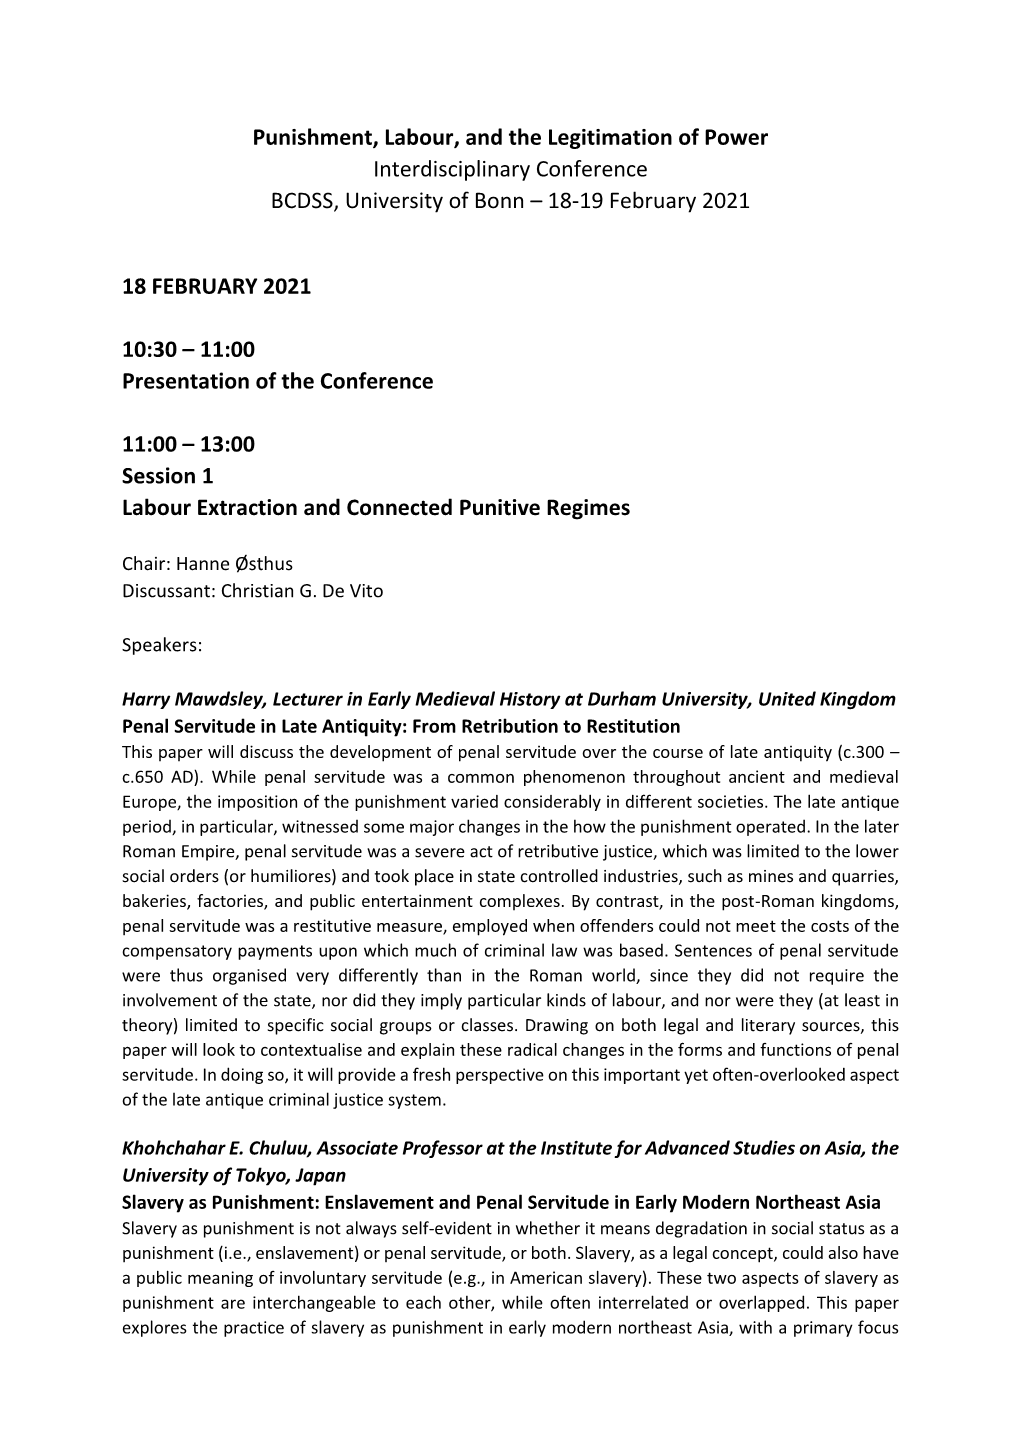 Punishment, Labour, and the Legitimation of Power Interdisciplinary Conference BCDSS, University of Bonn – 18-19 February 2021